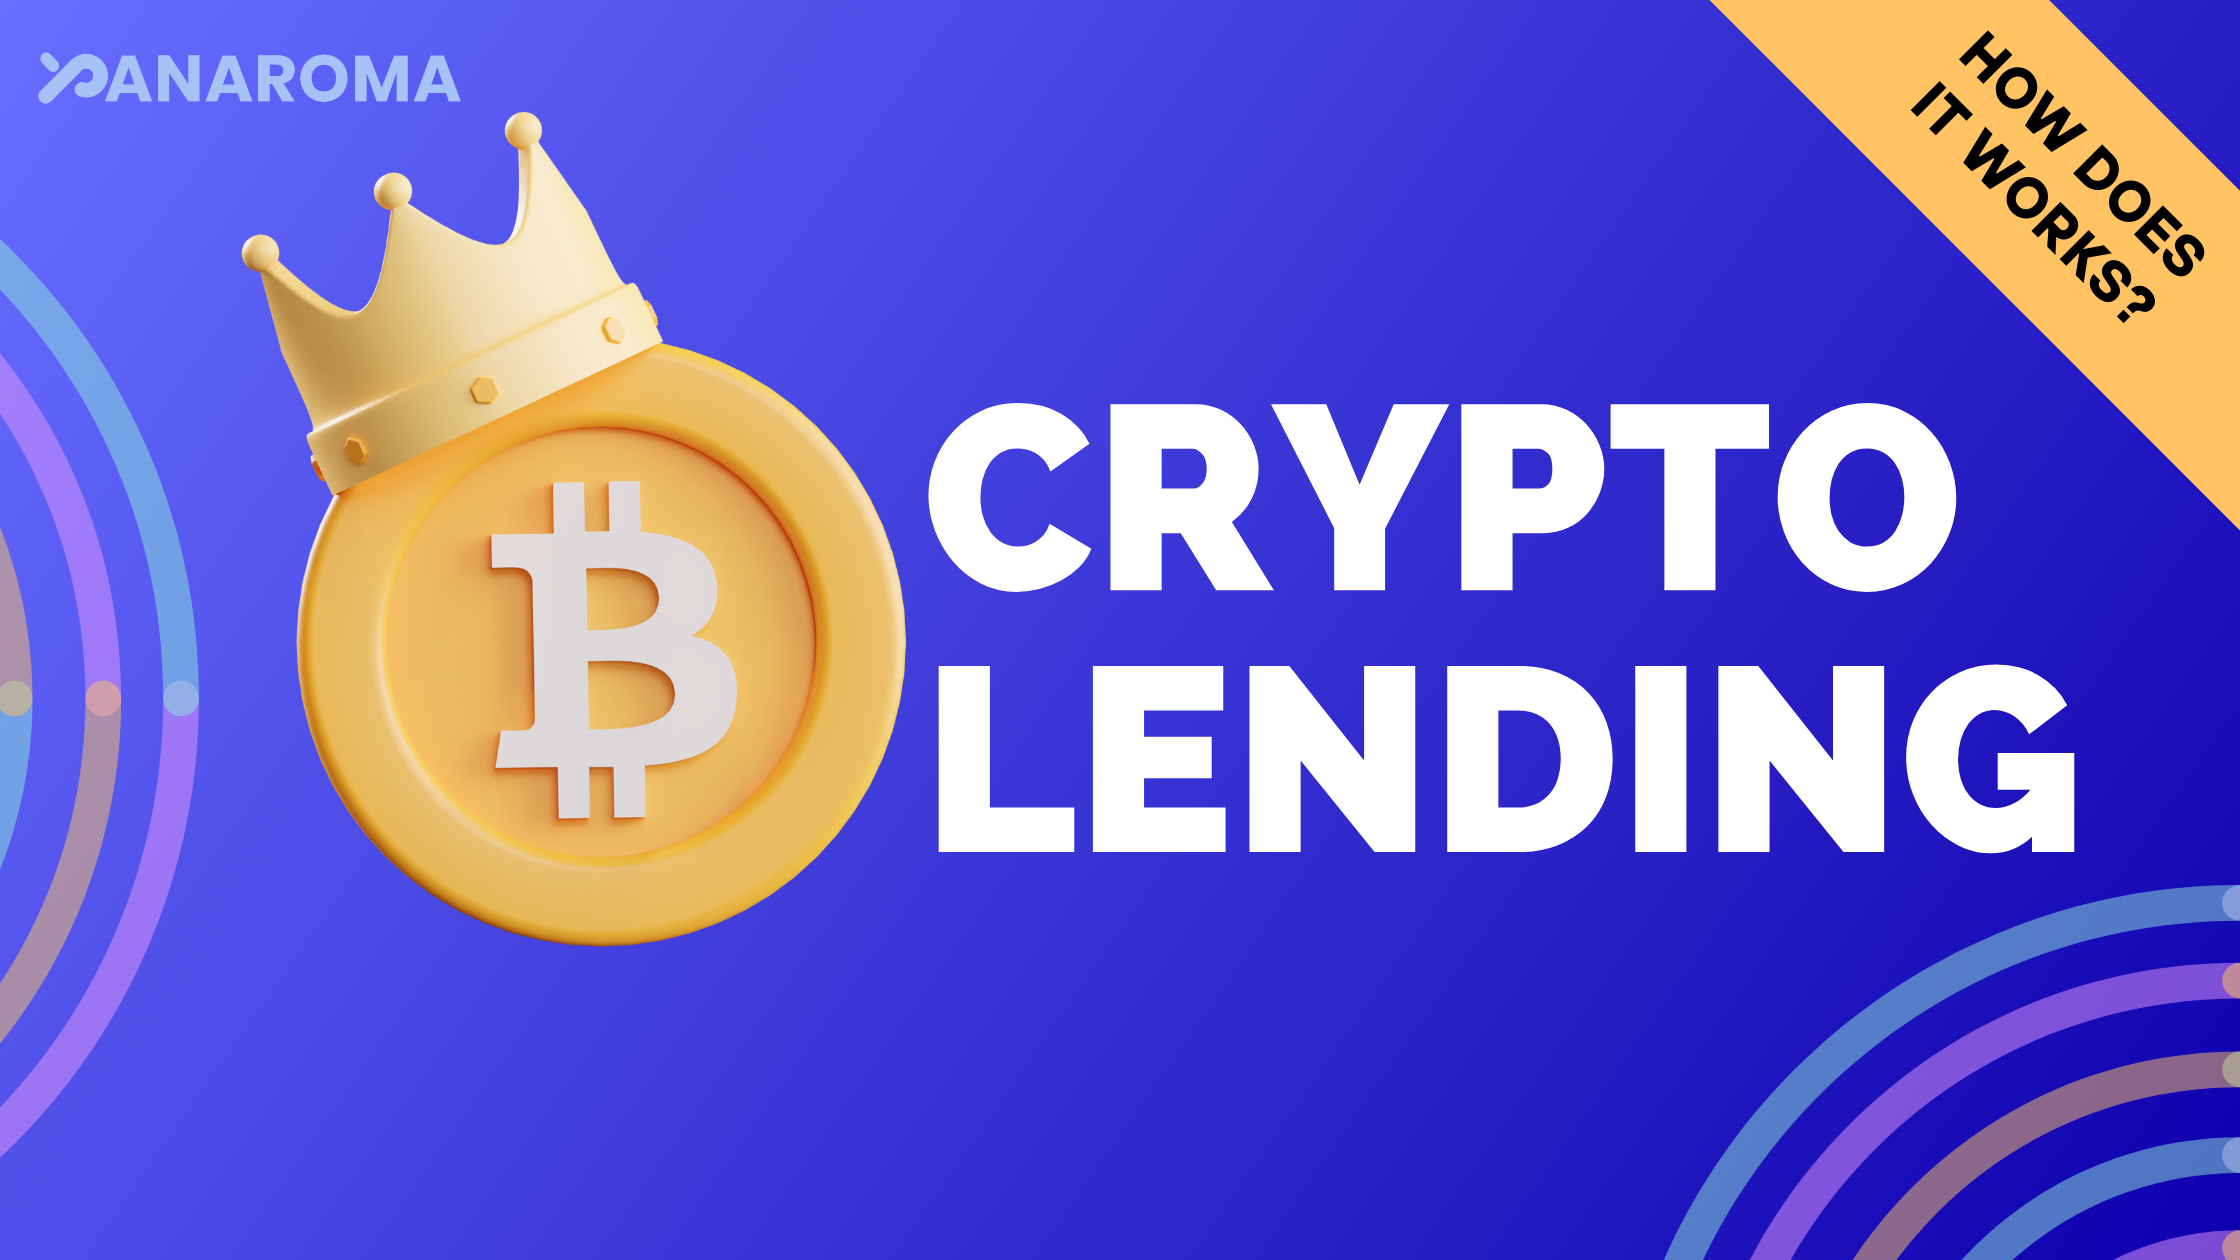 What Is Crypto Lending? How Does It Work?